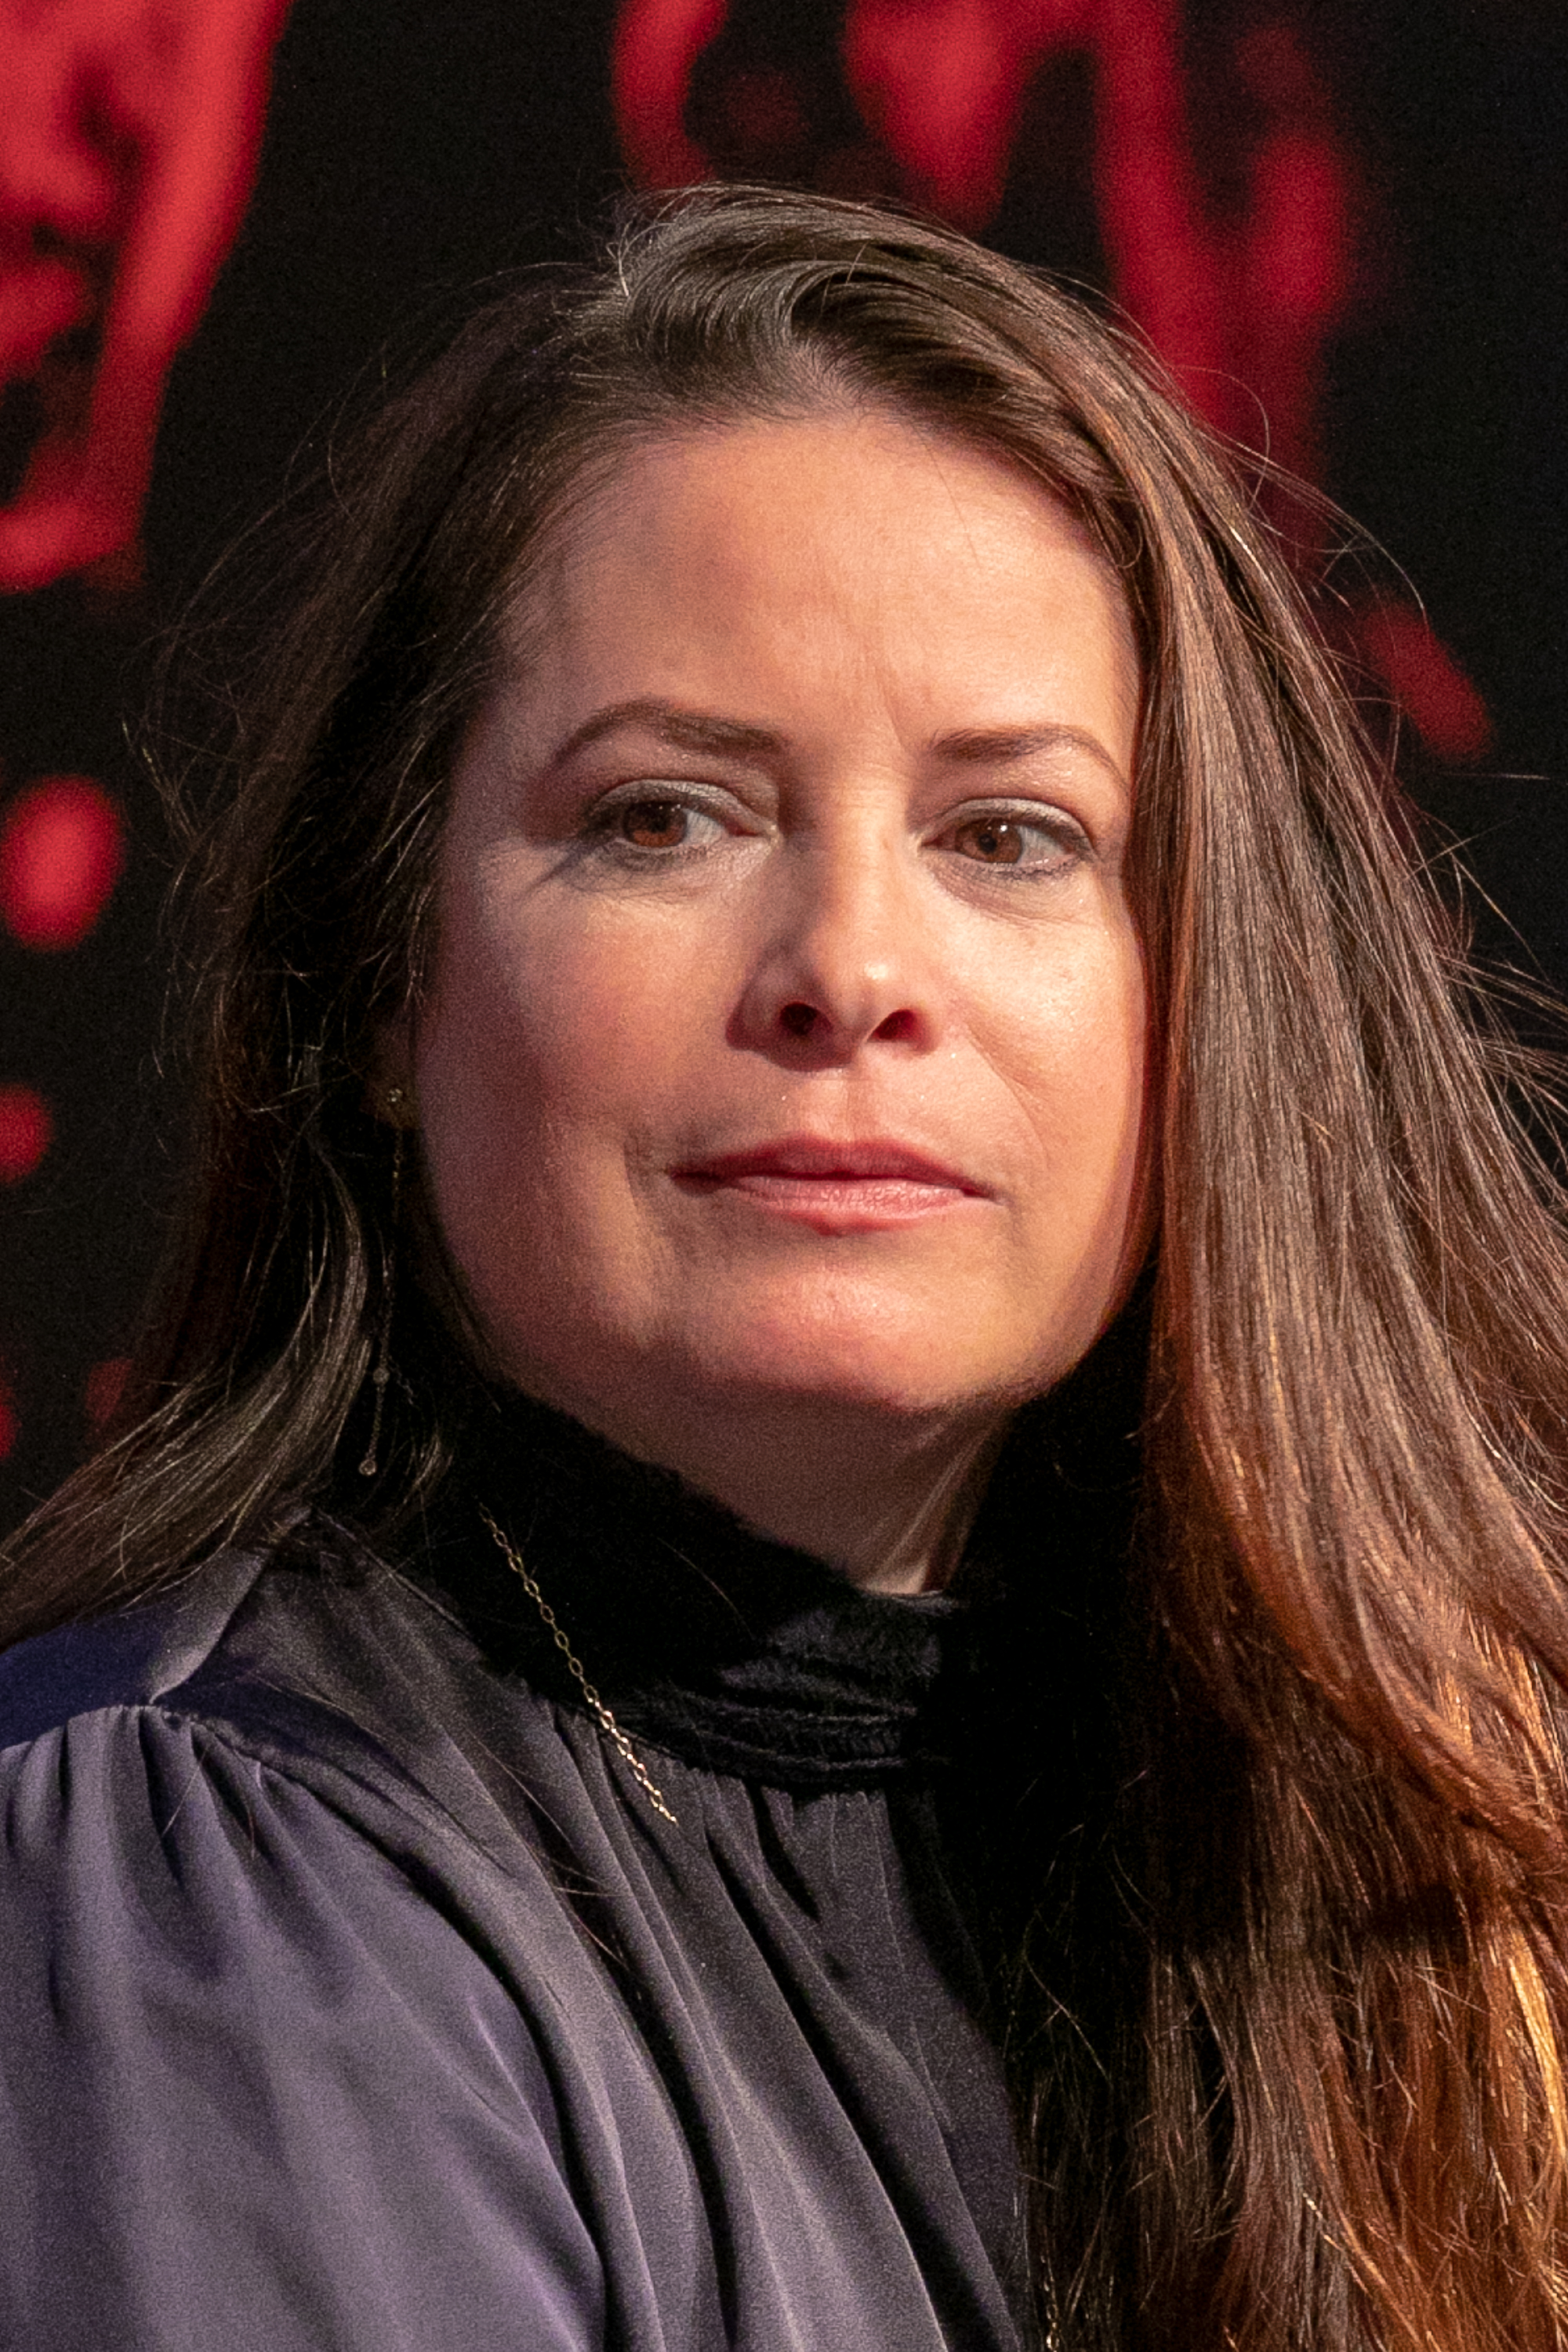 Holly Marie Combs at the Manga & Sci-Fi show at Parc des Expositions Porte de Versailles in France, 2018 | Source: Getty Images